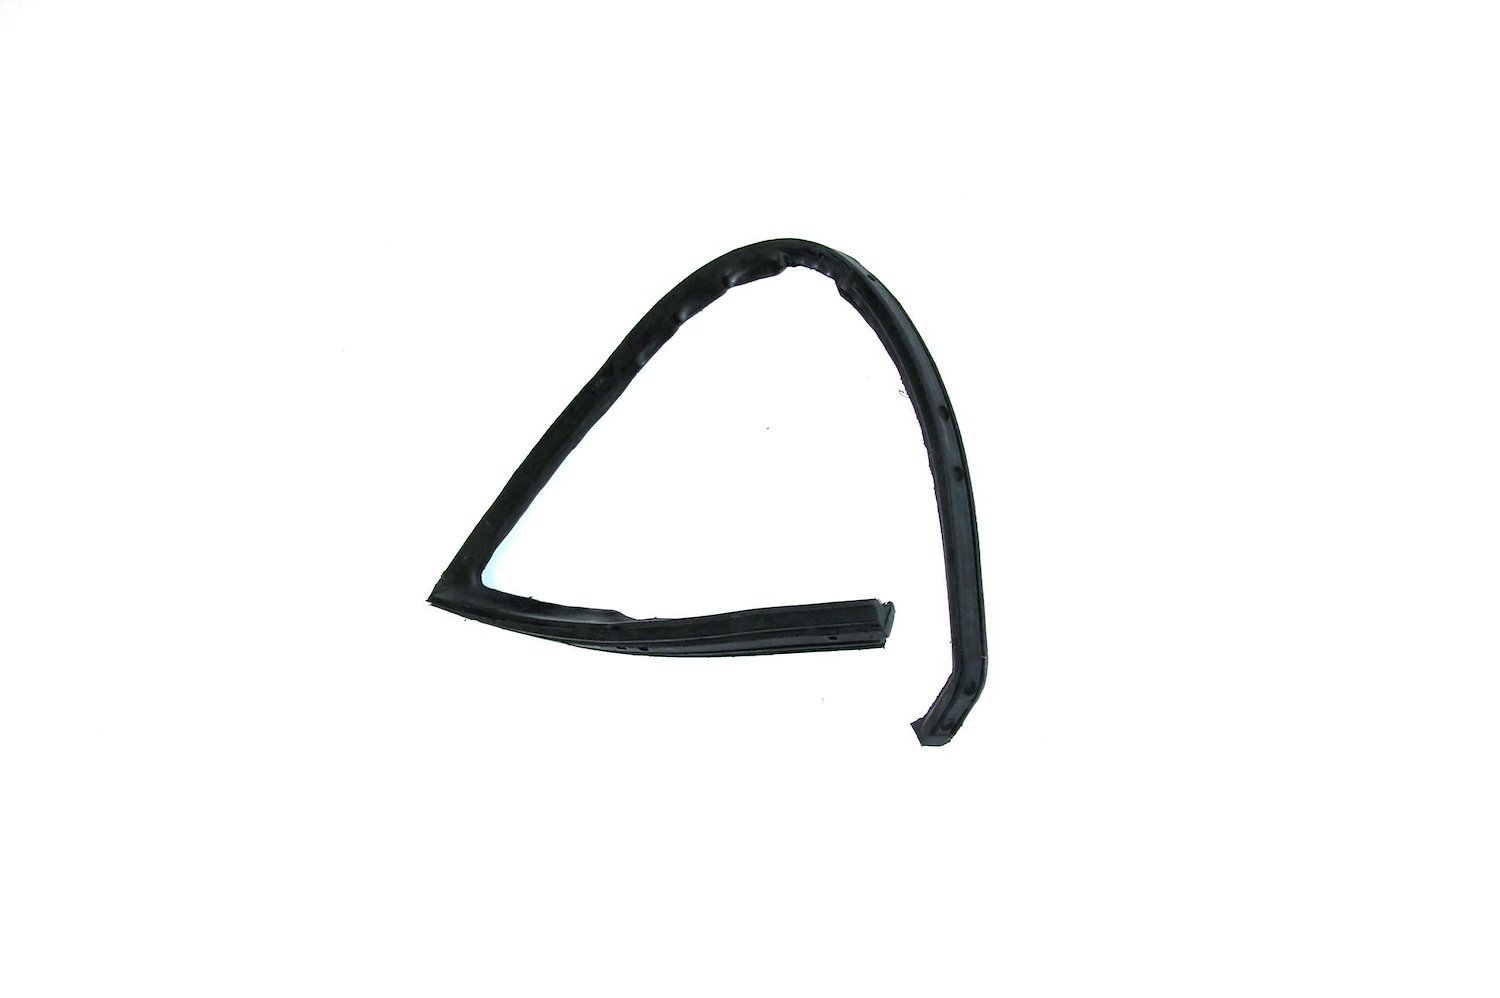 FC-F4913 Vent Window Seal, Left for 1966-1977 Ford Bronco, 1976-1976 Ford F-100